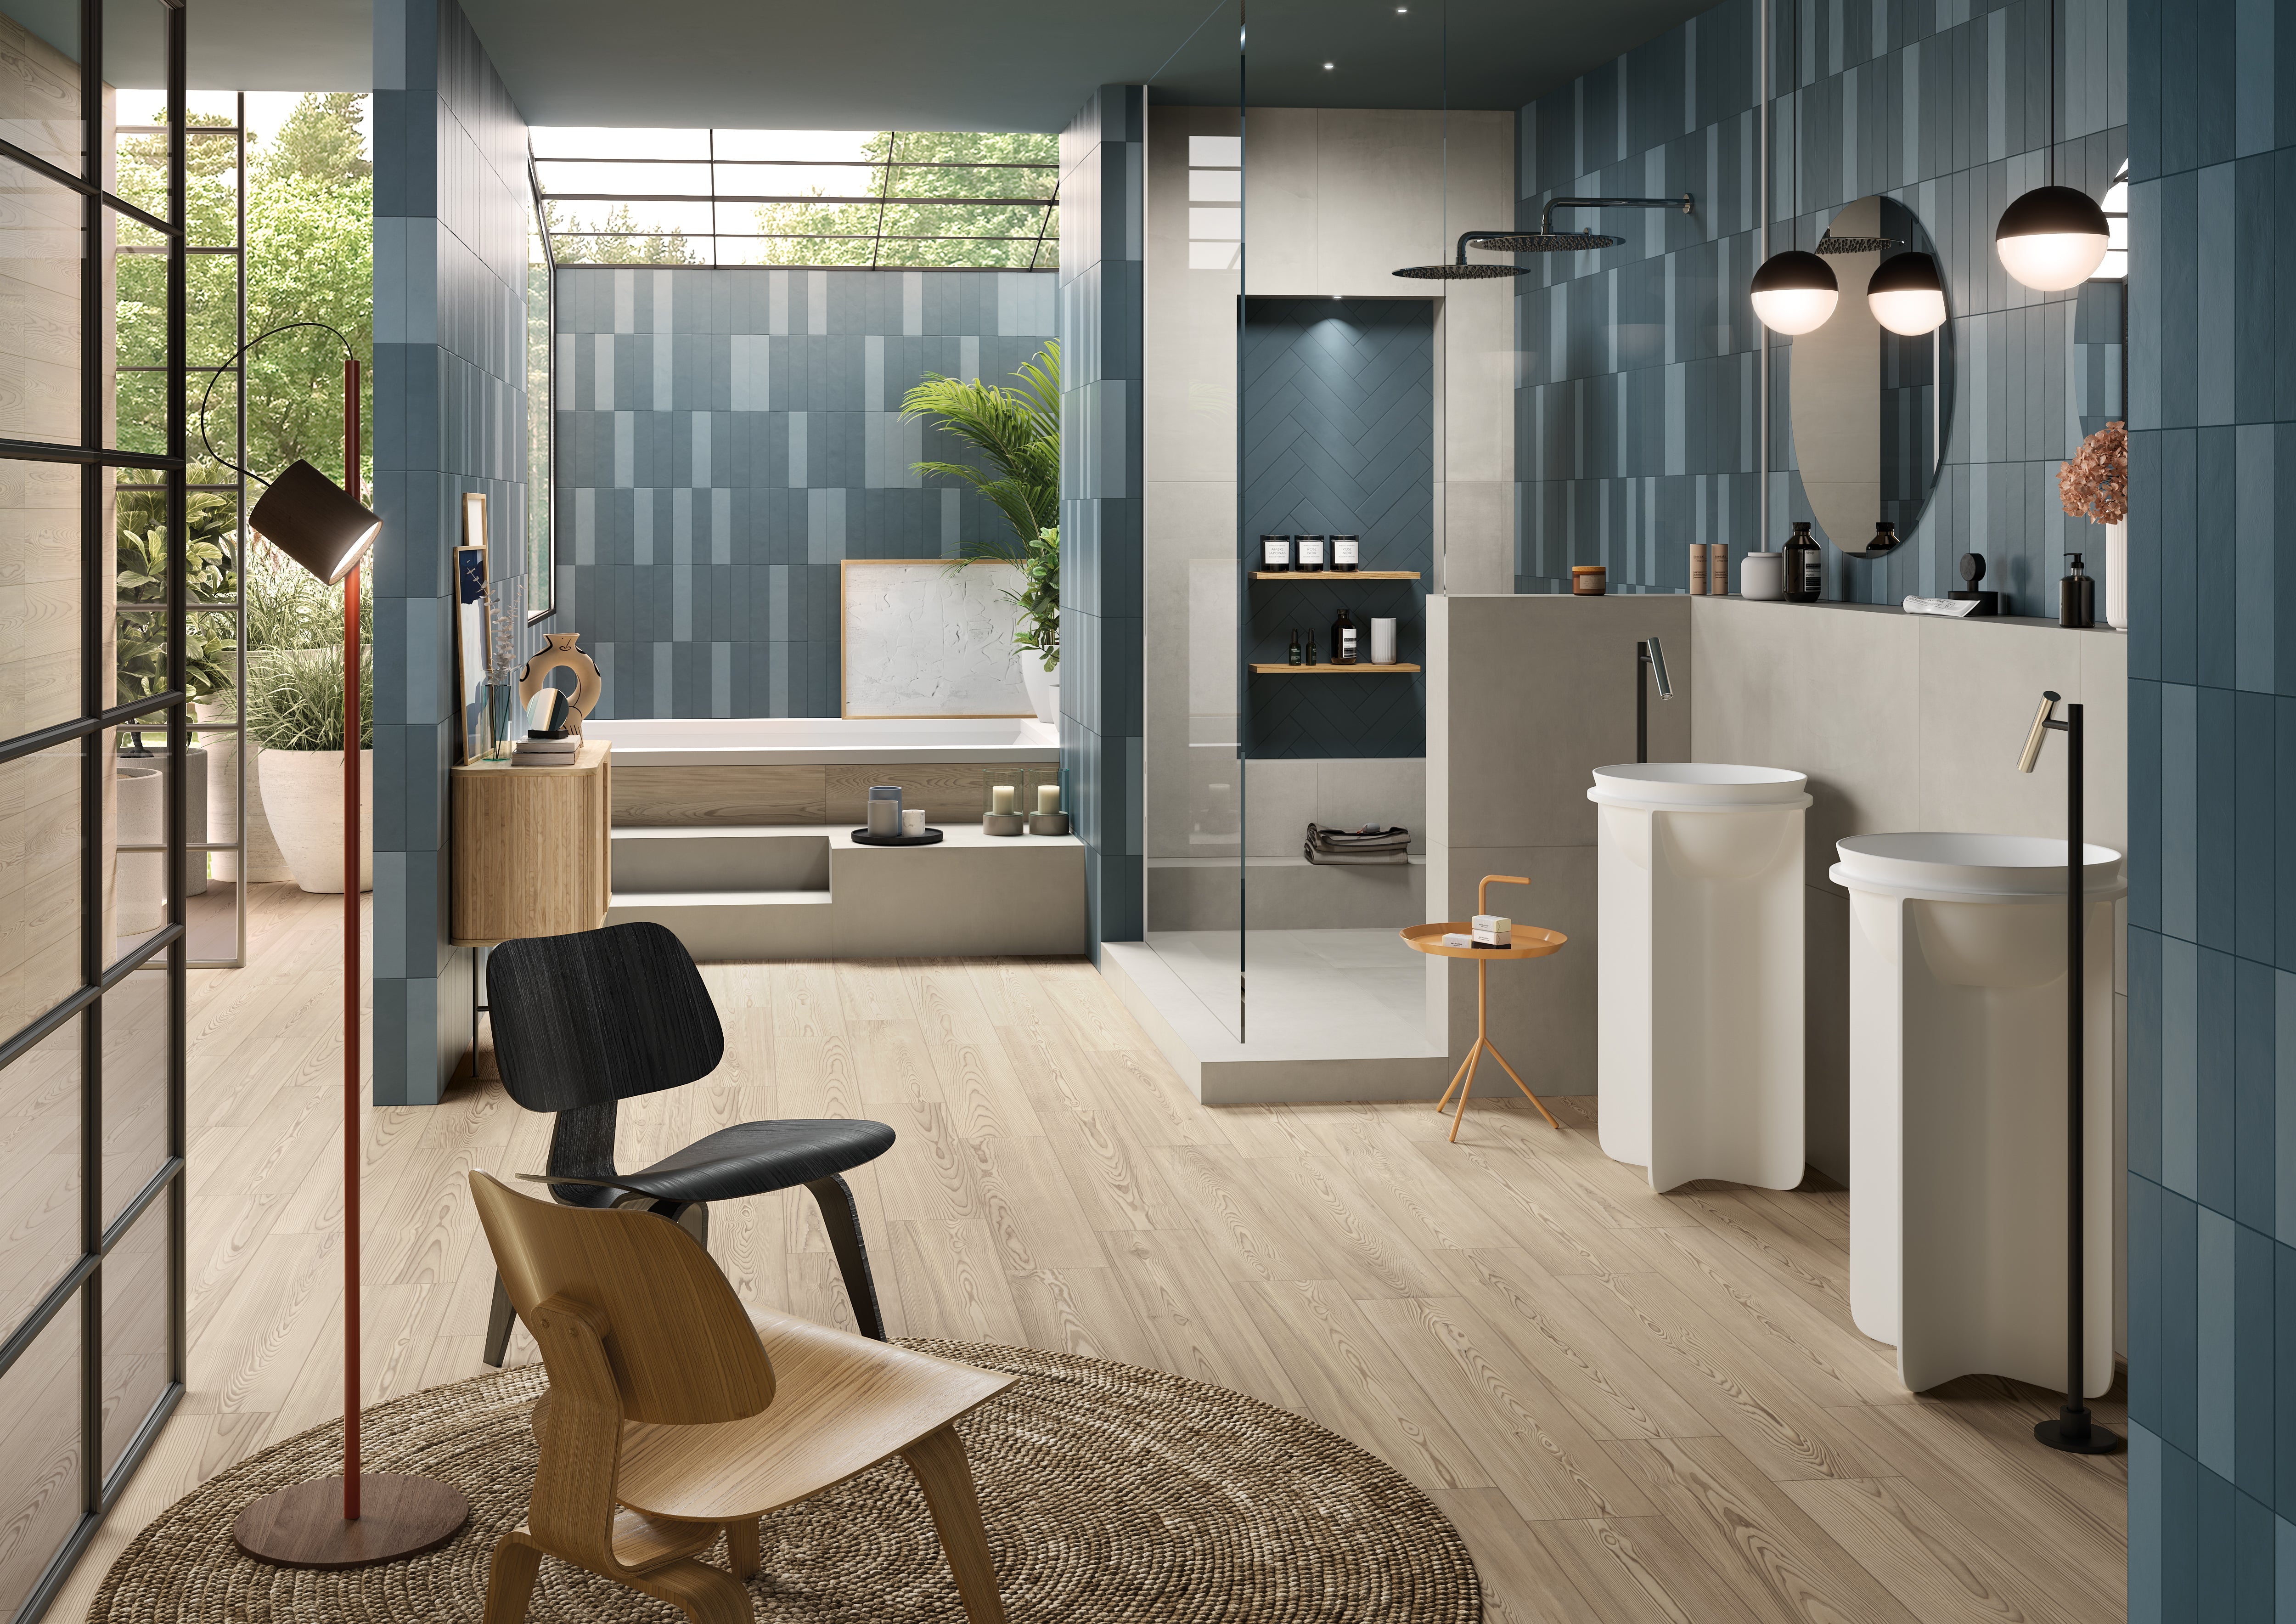 Modern porcelain tile collection from Surface Group showcasing various shades of blue and grey tiles in a stylish bathroom setting with natural light.